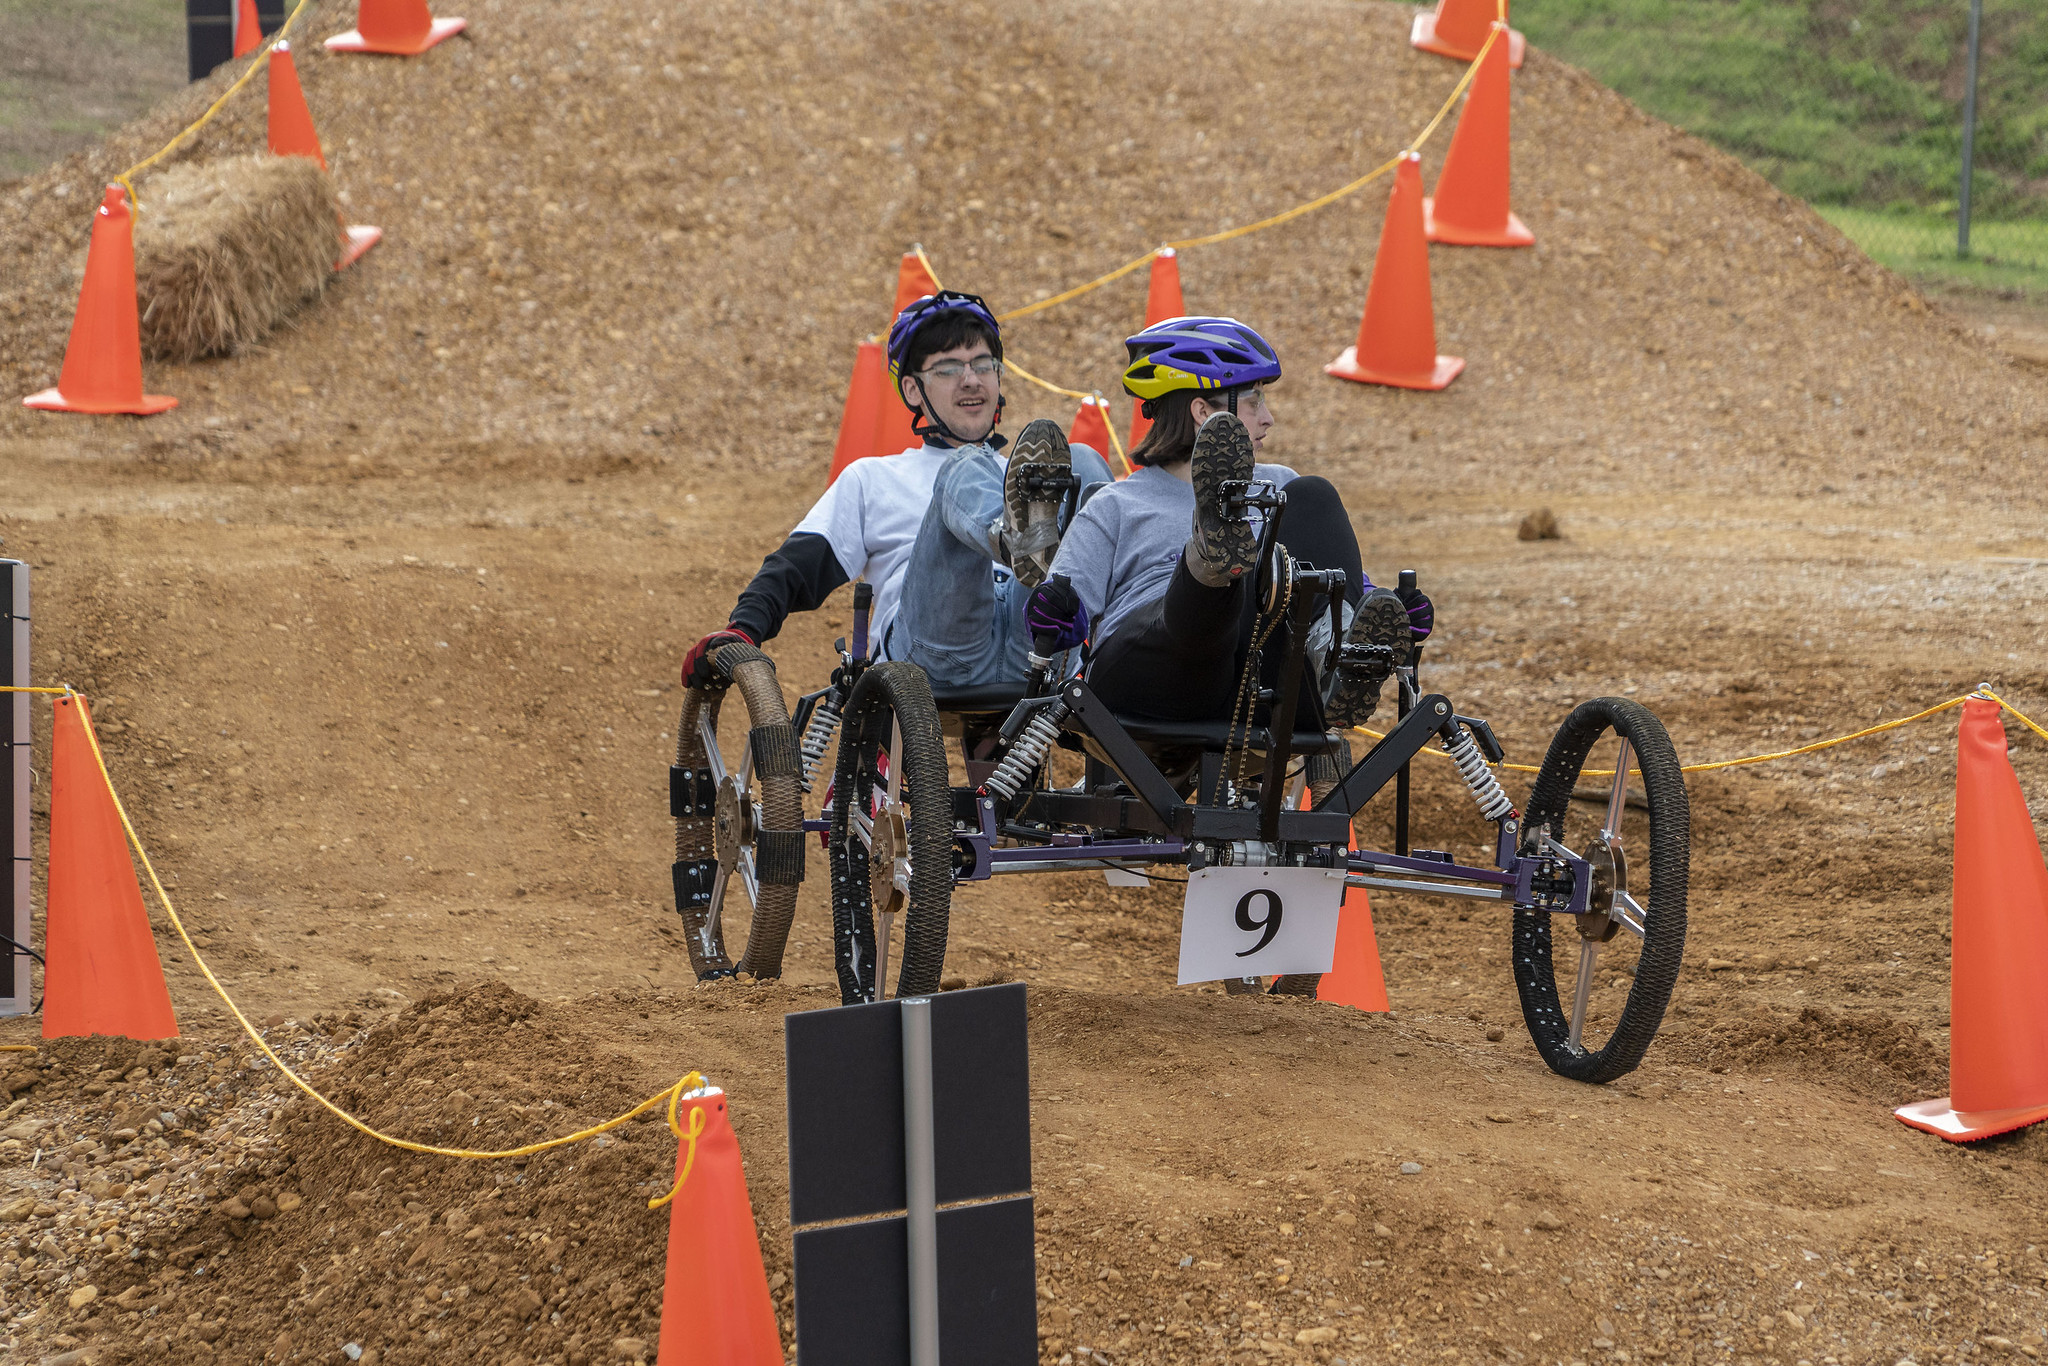 A team competes in the 2019 Human Exploration Rover Challenge at the U.S. Space & Rocket Center in Huntsville. The 2022 event will be held virtually. 